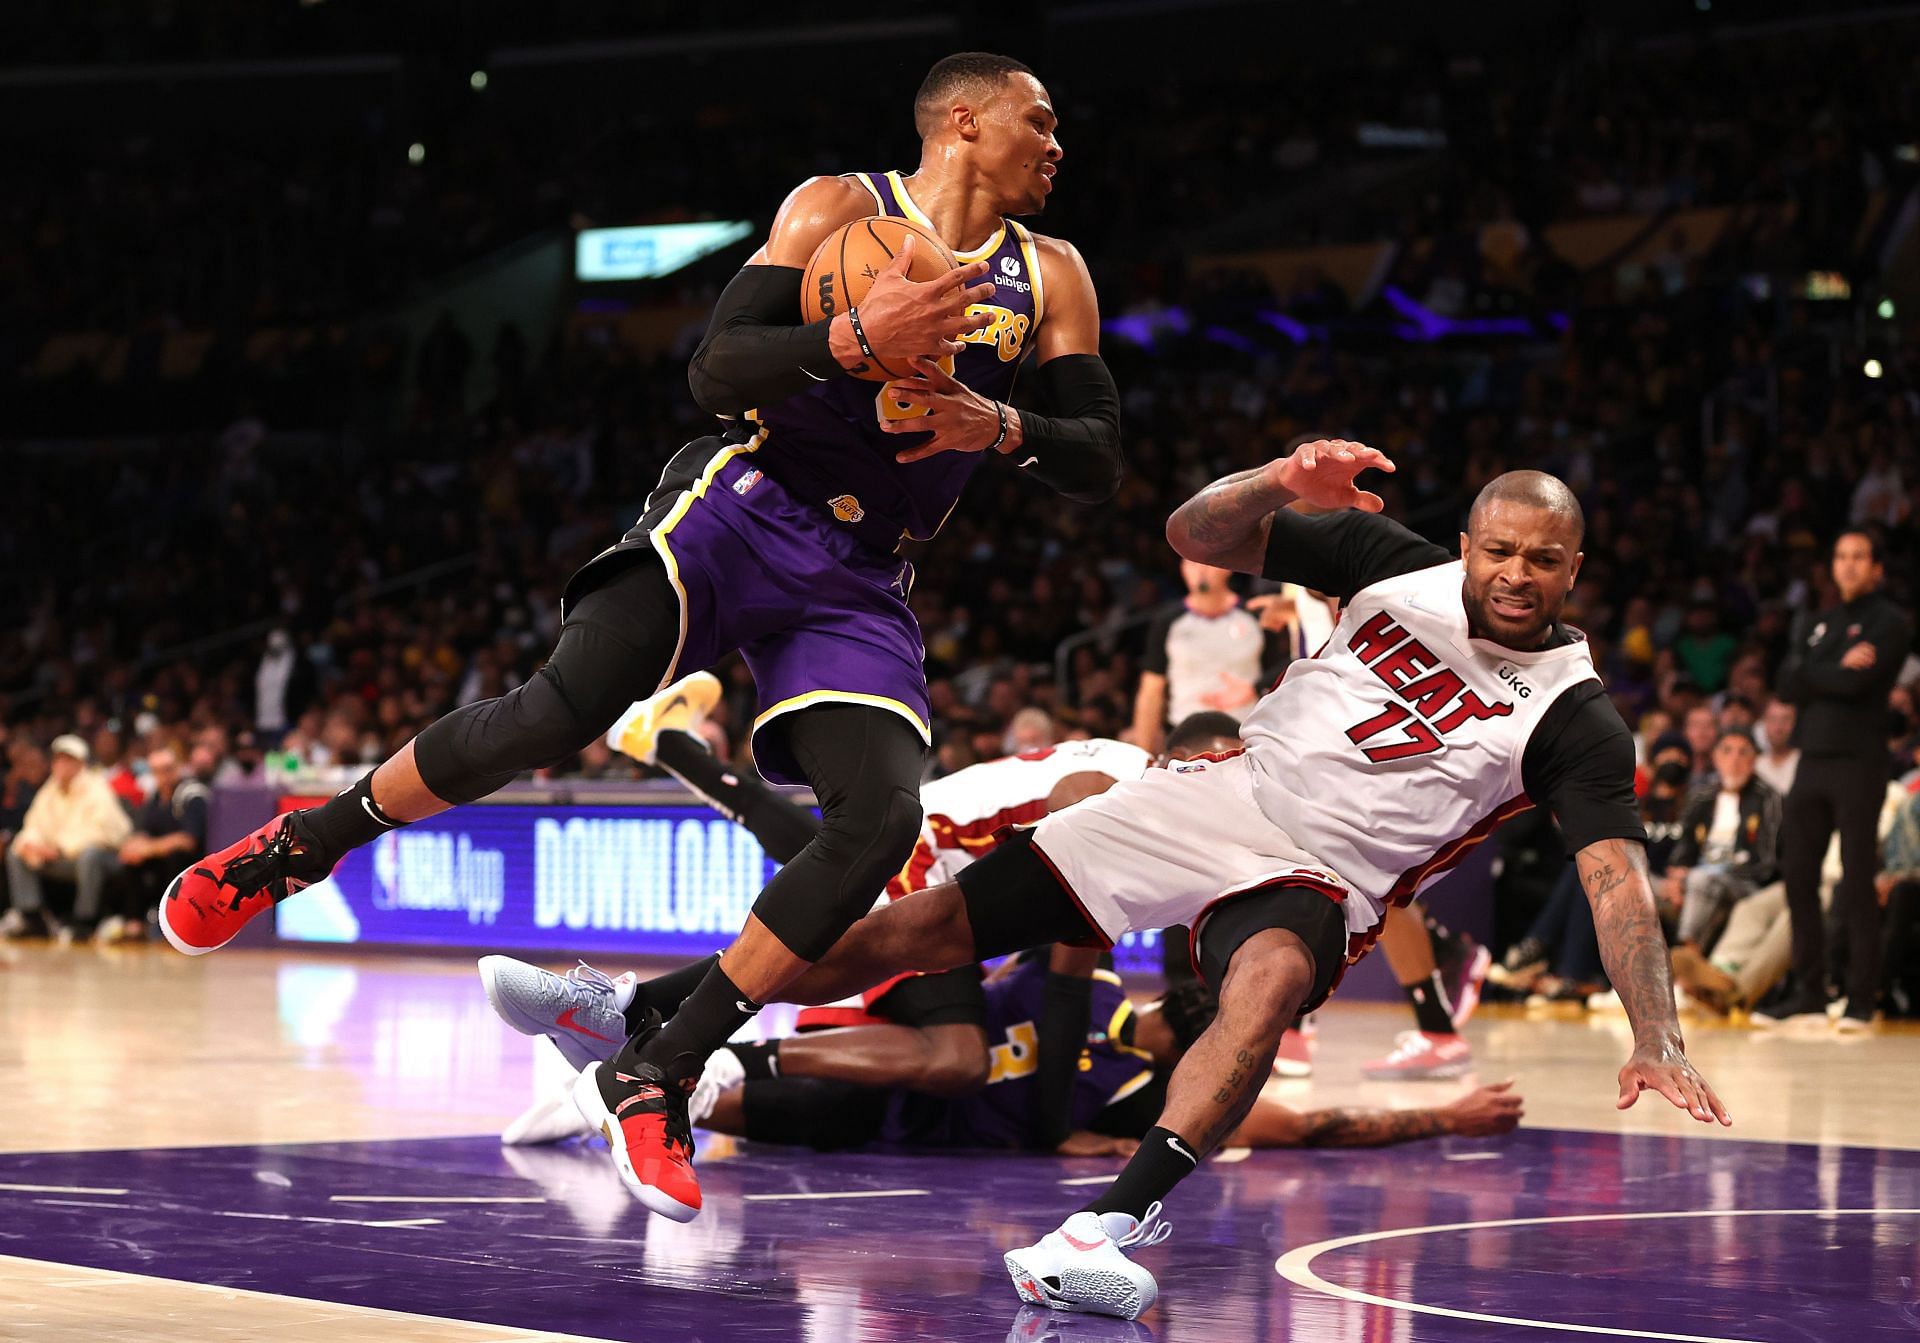 Rusell Westbrook of the Los Angeles Lakers against the Miami Heat